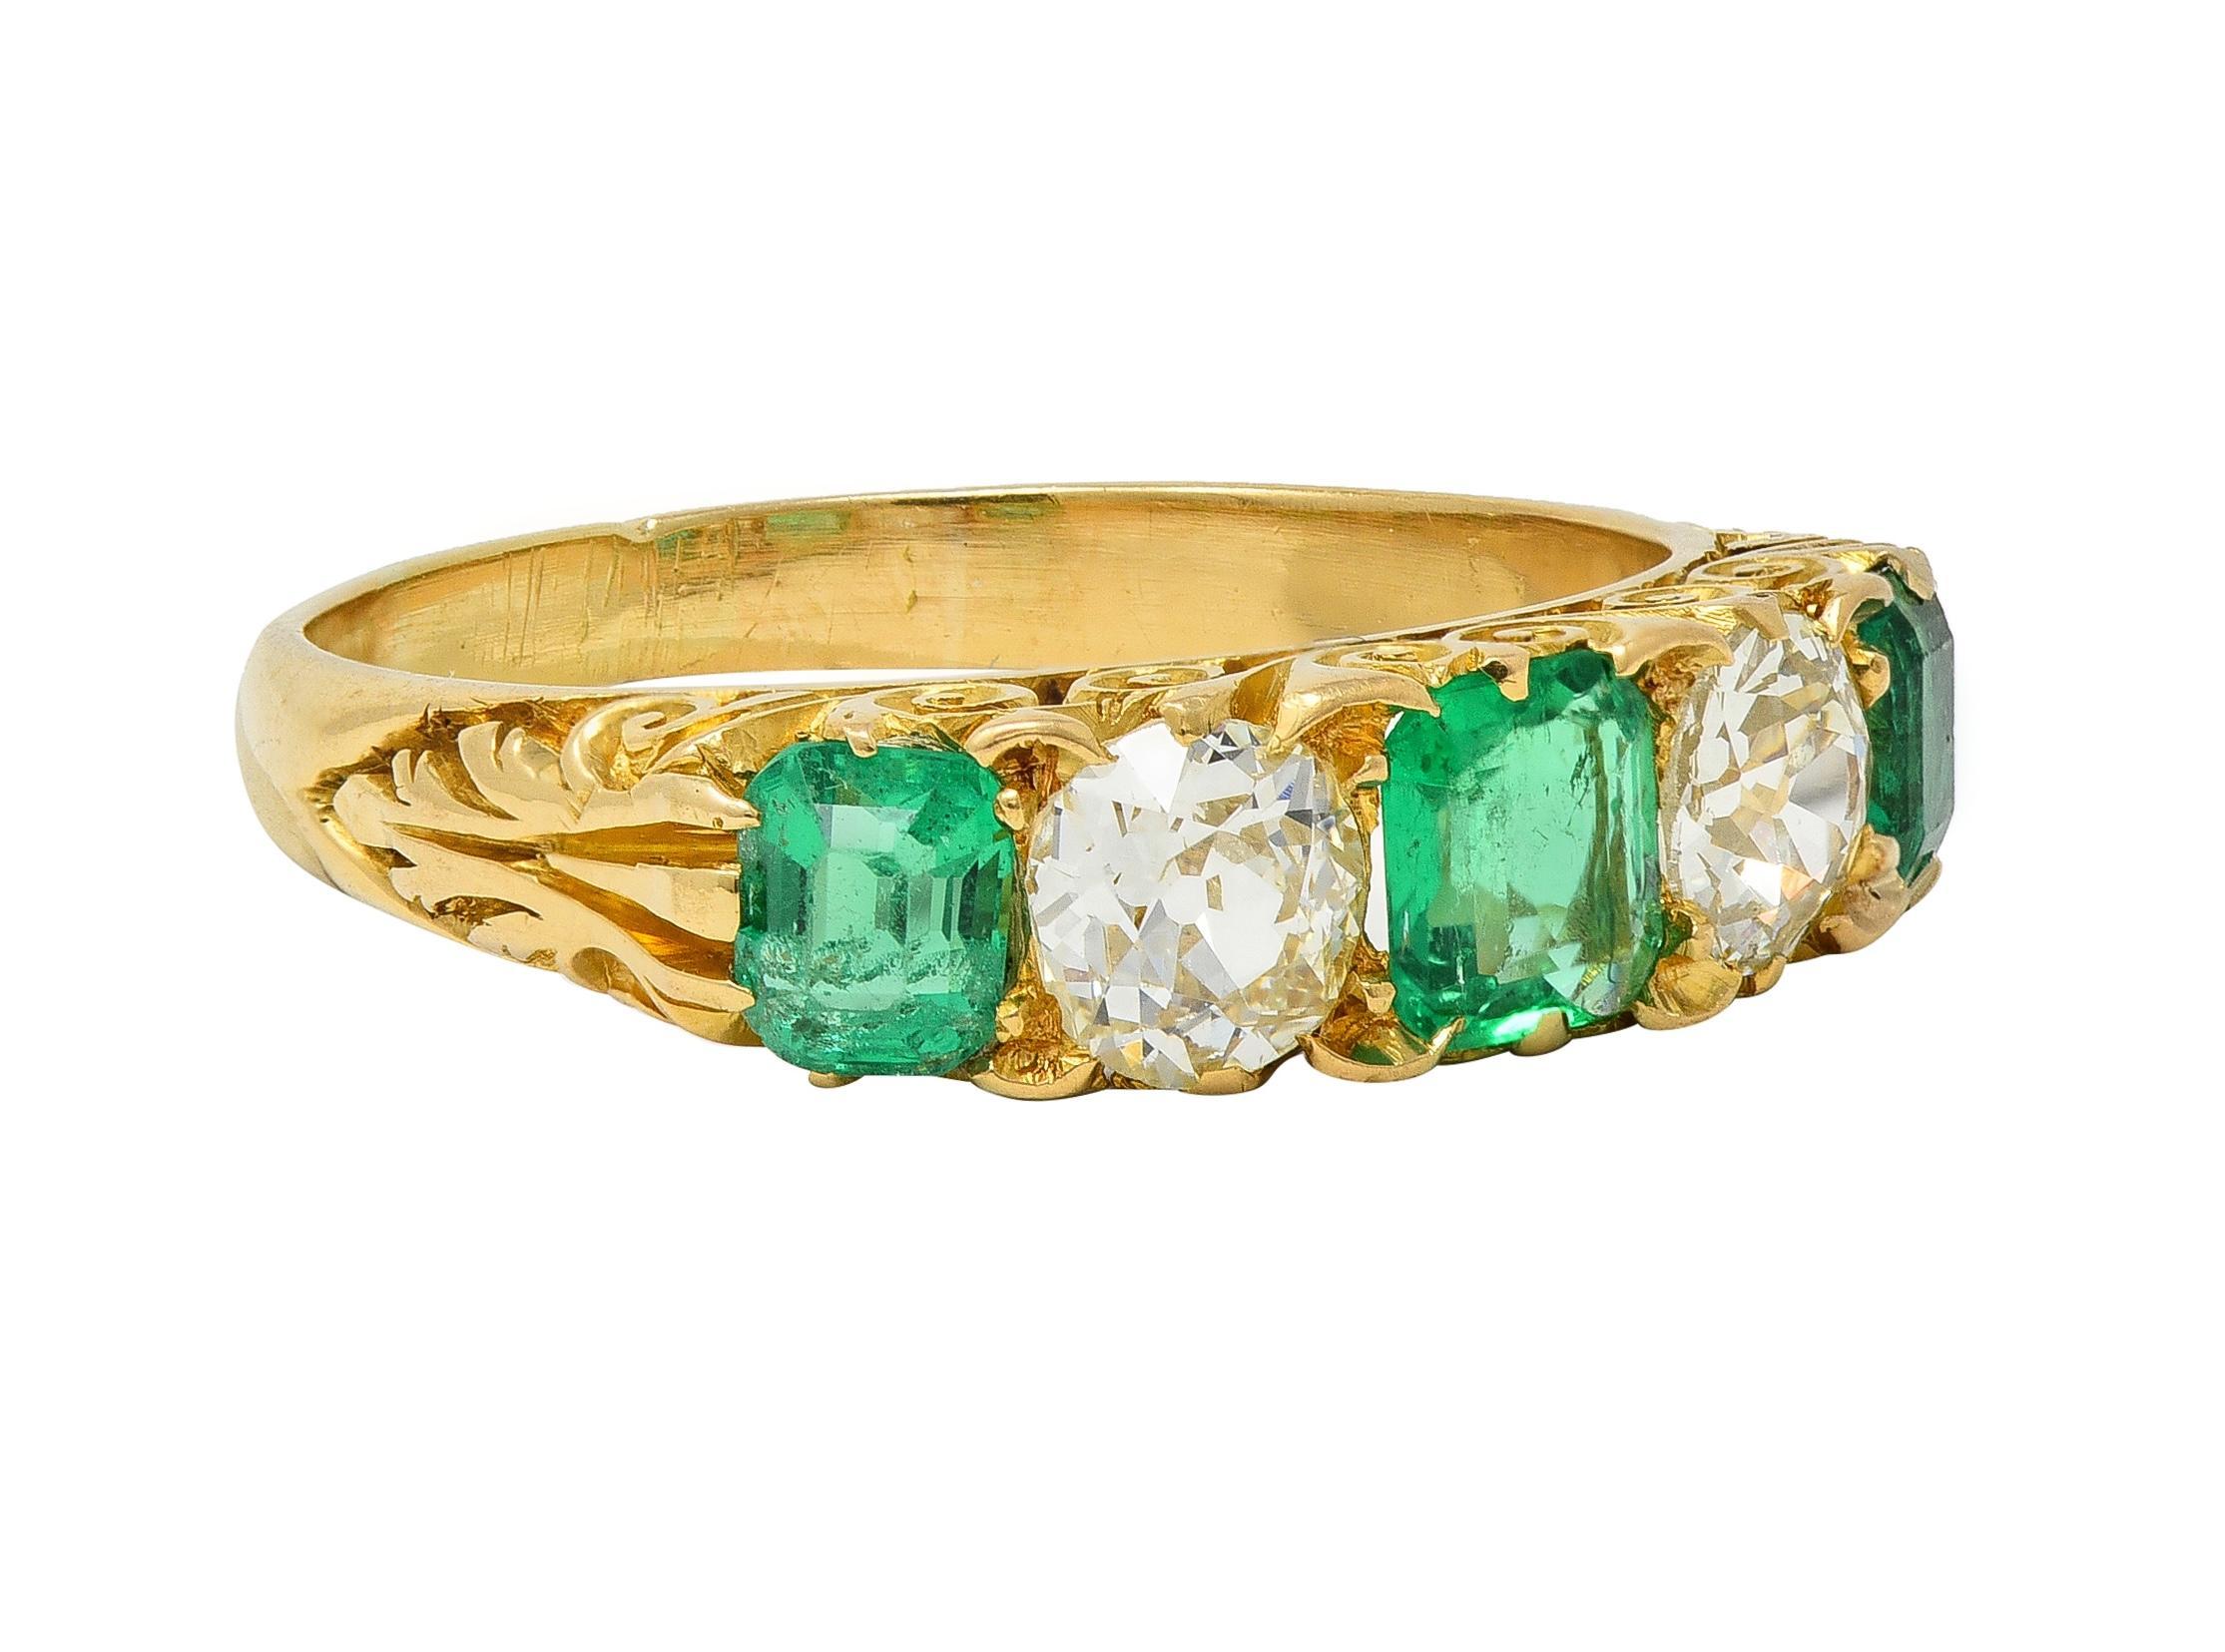 Featuring three emerald cut emeralds weighing approximately 1.44 carats total
Transparent medium green and alternating with old European cut diamonds 
Weighing approximately 0.74 carat total - G color with VS2 clarity
Prong set with a deeply grooved